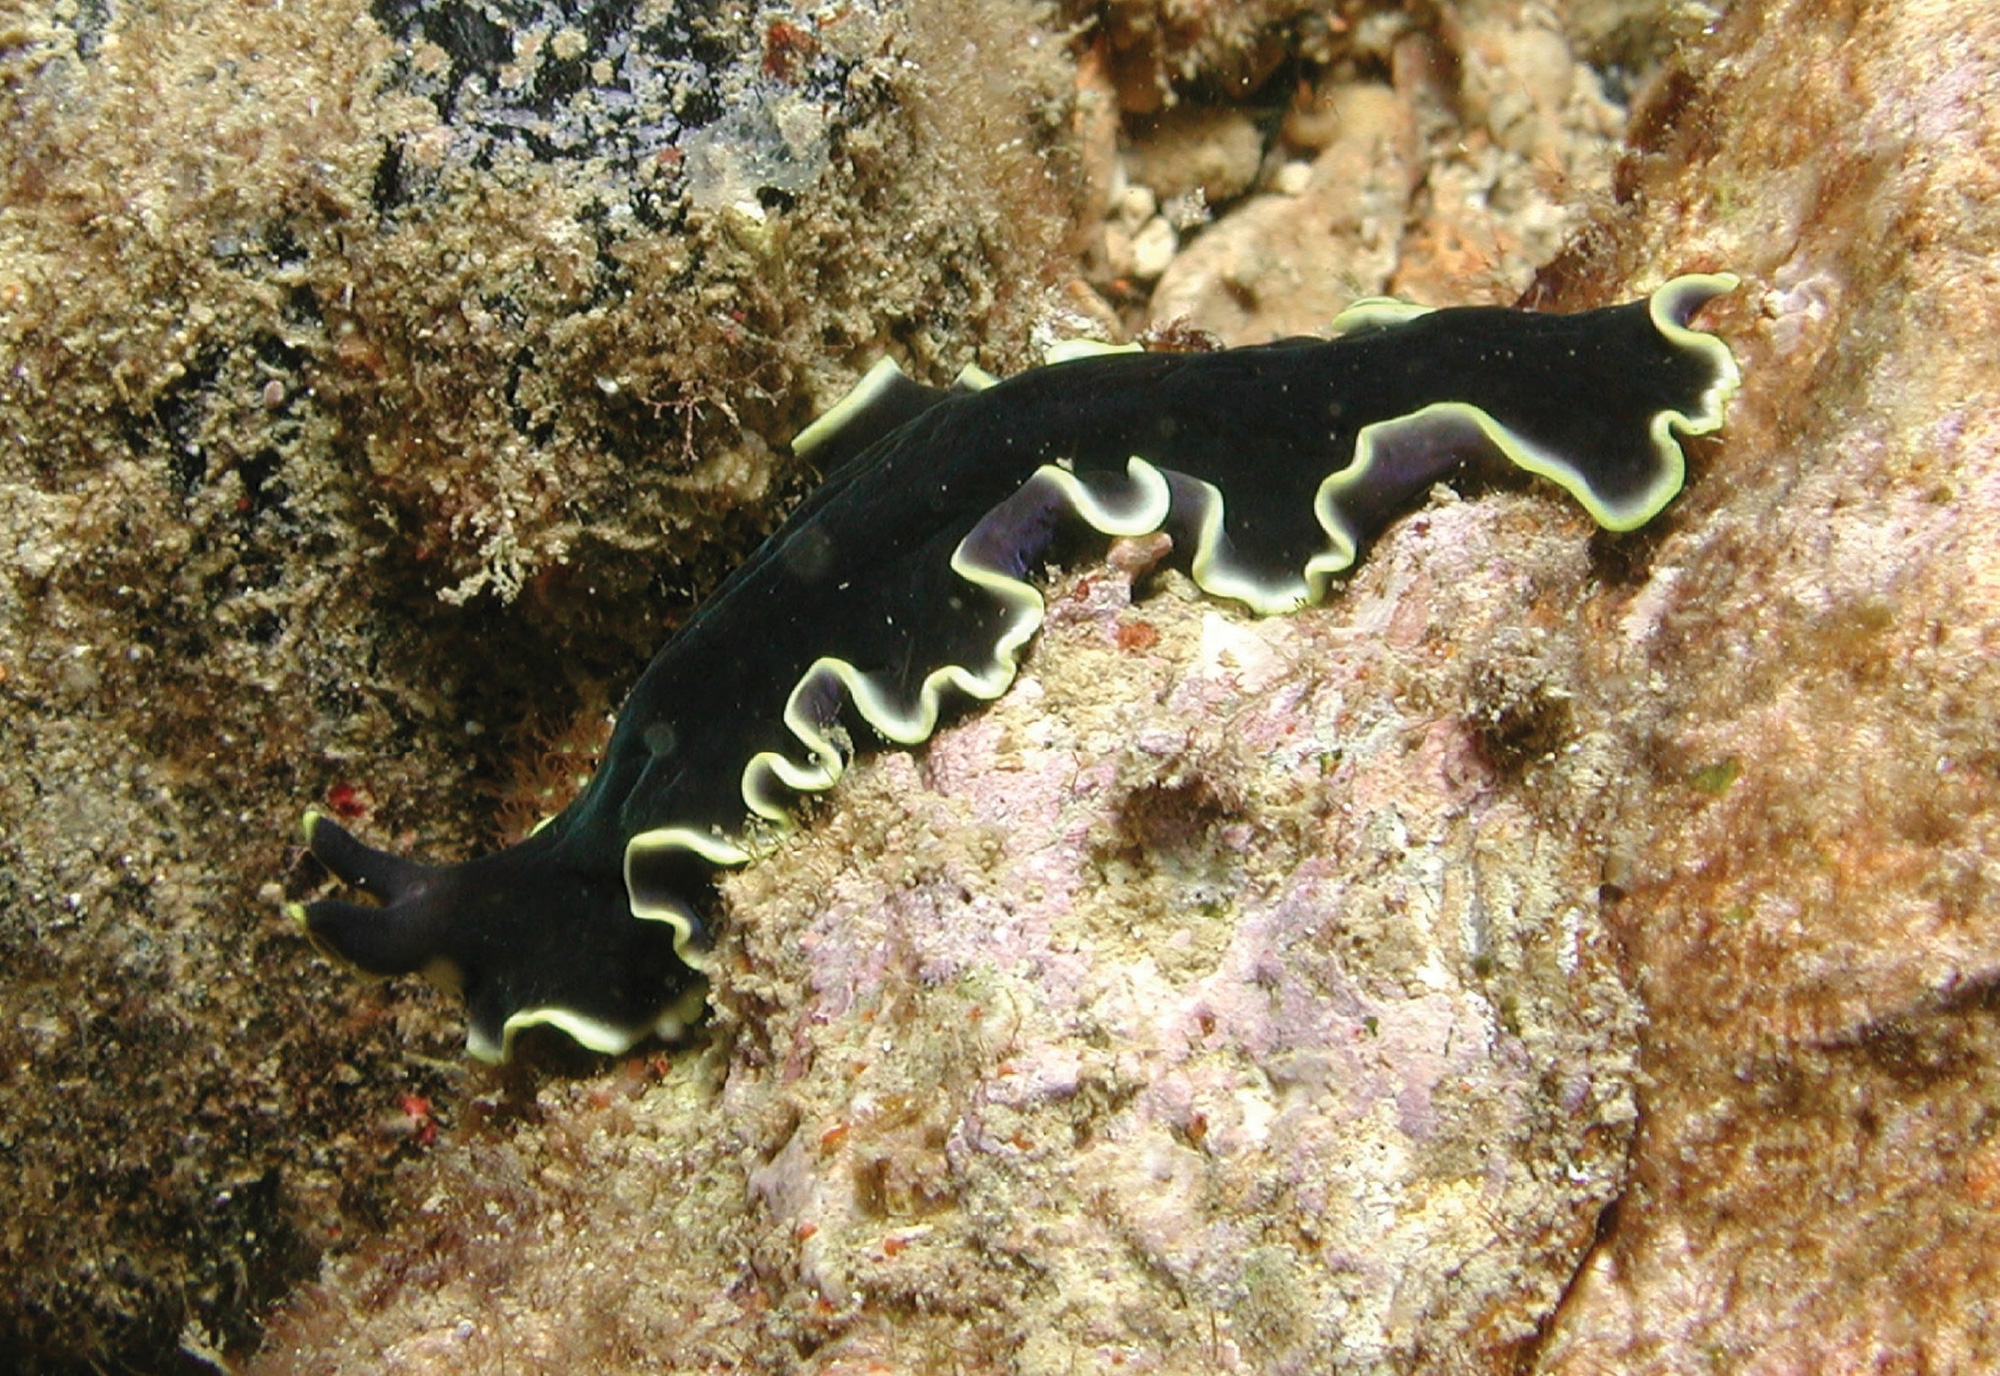 A photograph of a flatworm whose body displays an example of hyperbolic geometry.